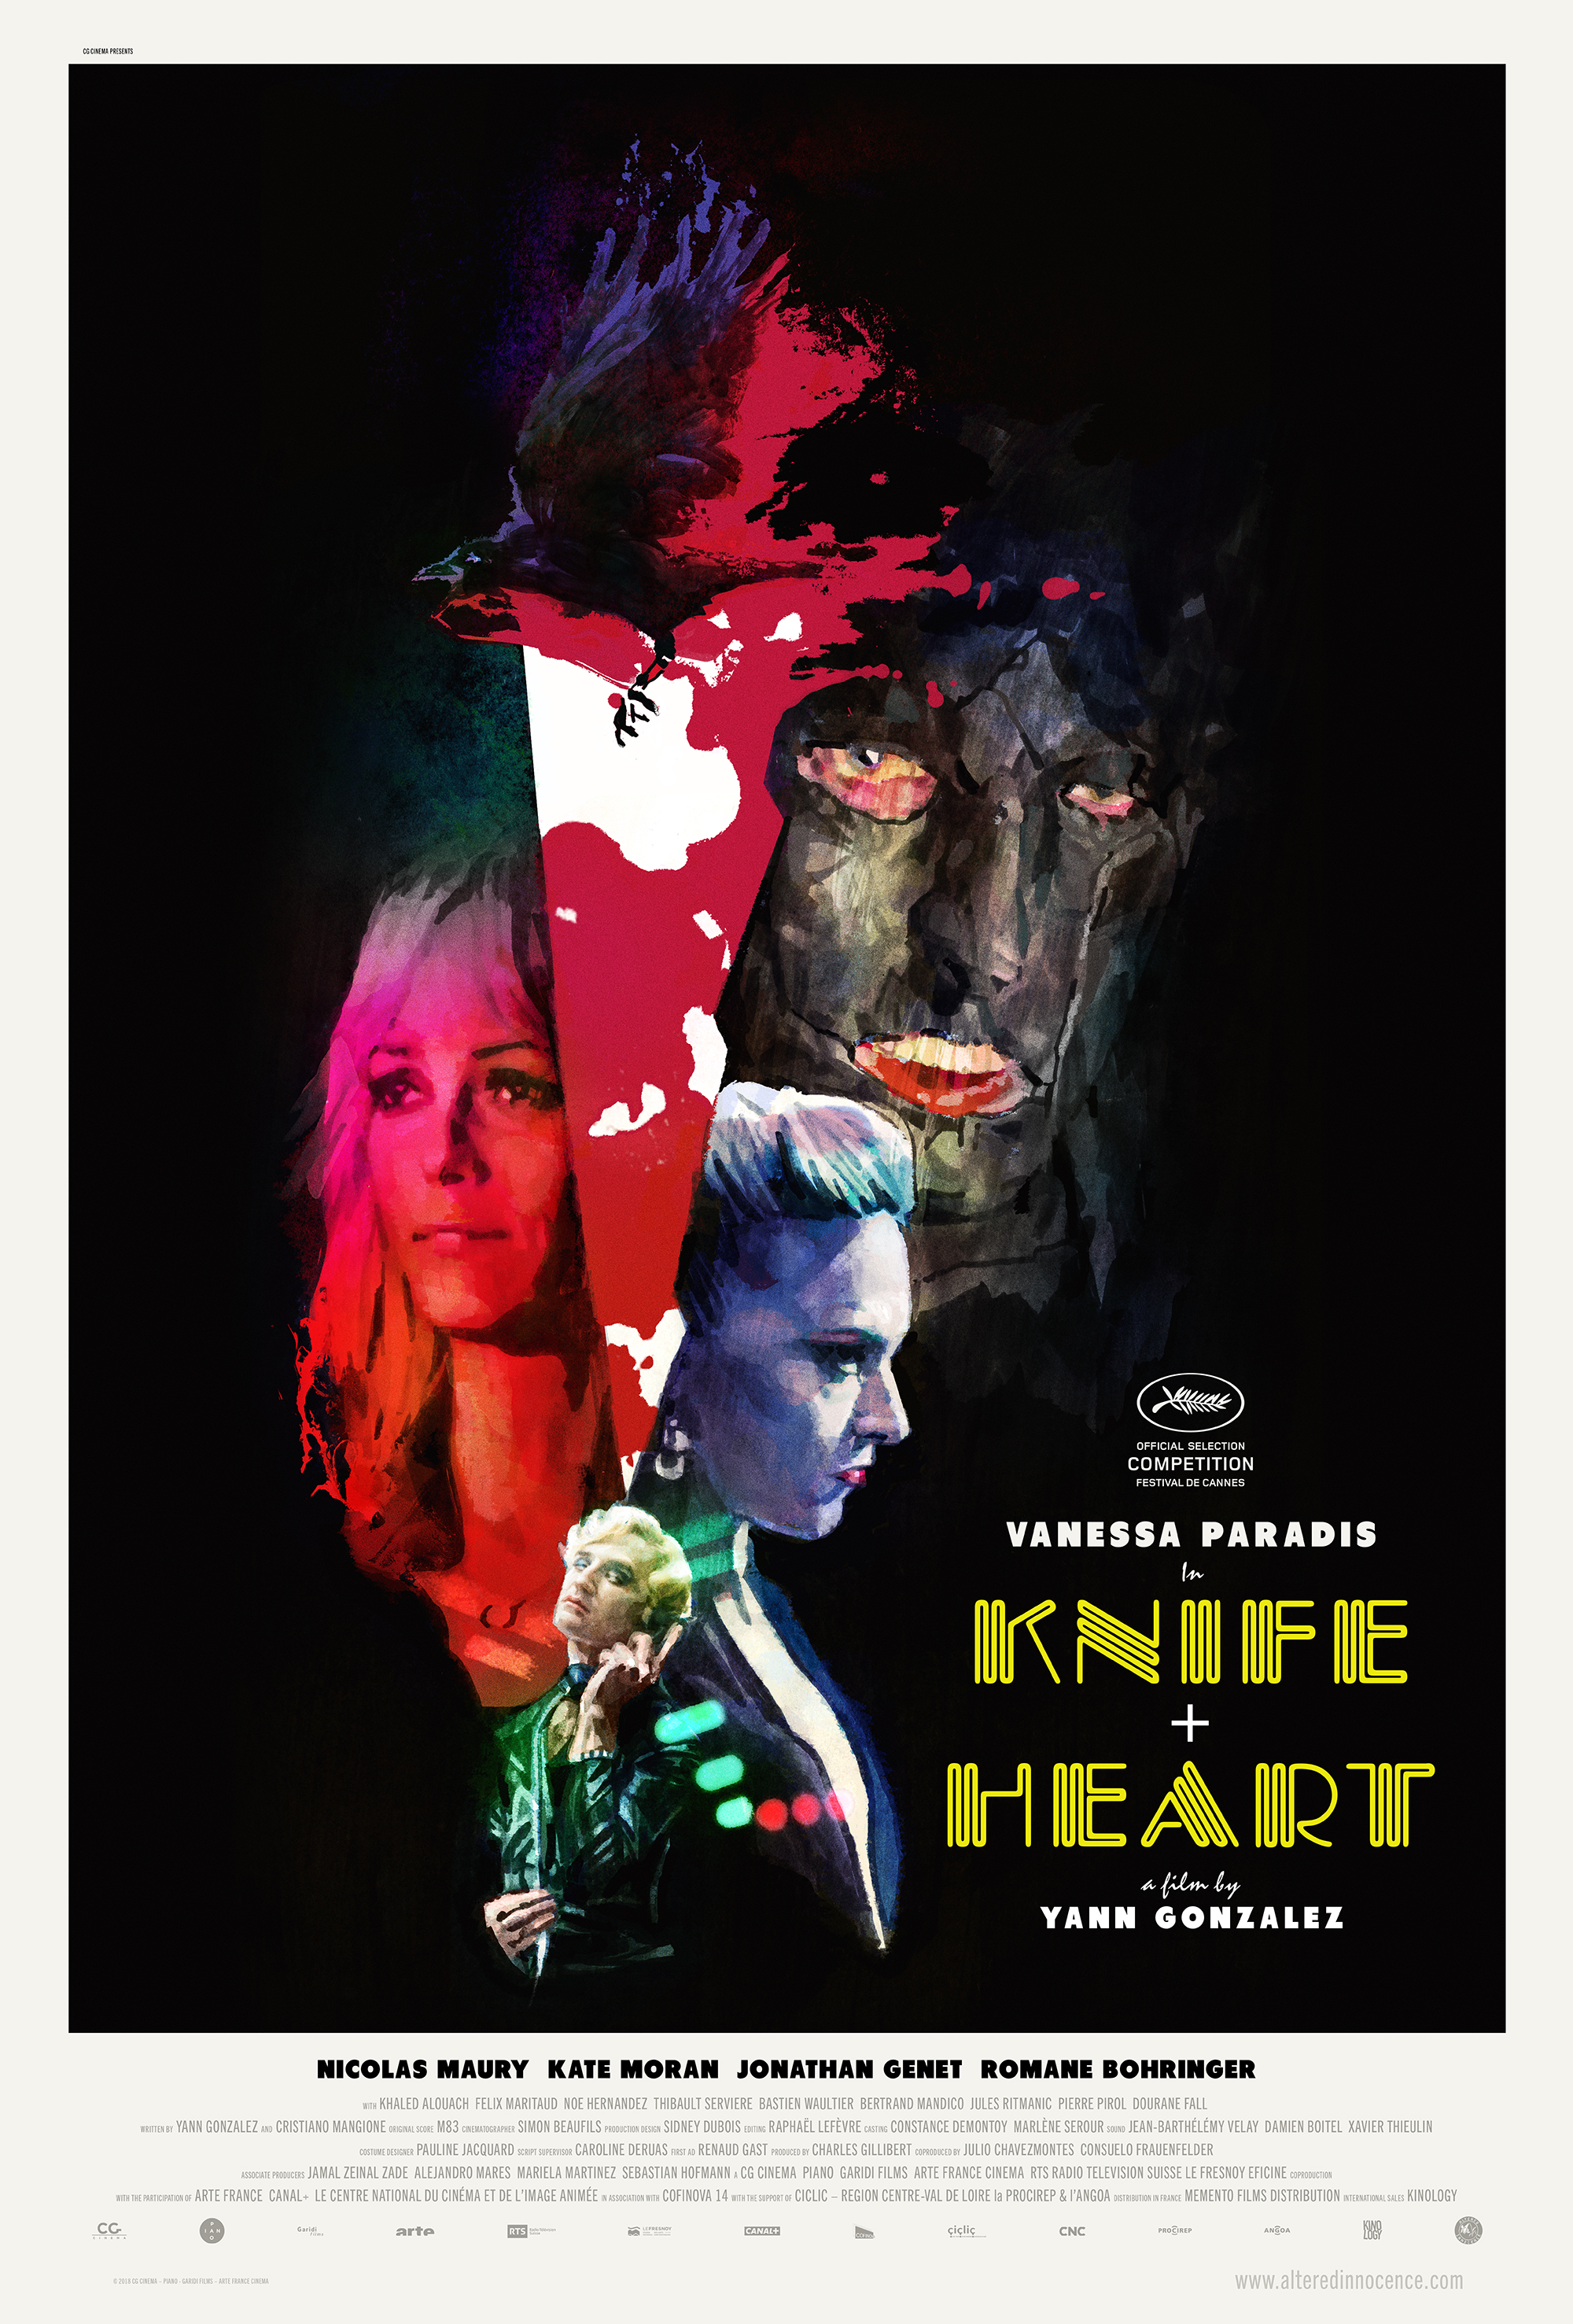 Rent-A-Pal: Sanity on a Knife's Edge {Movie Review} 